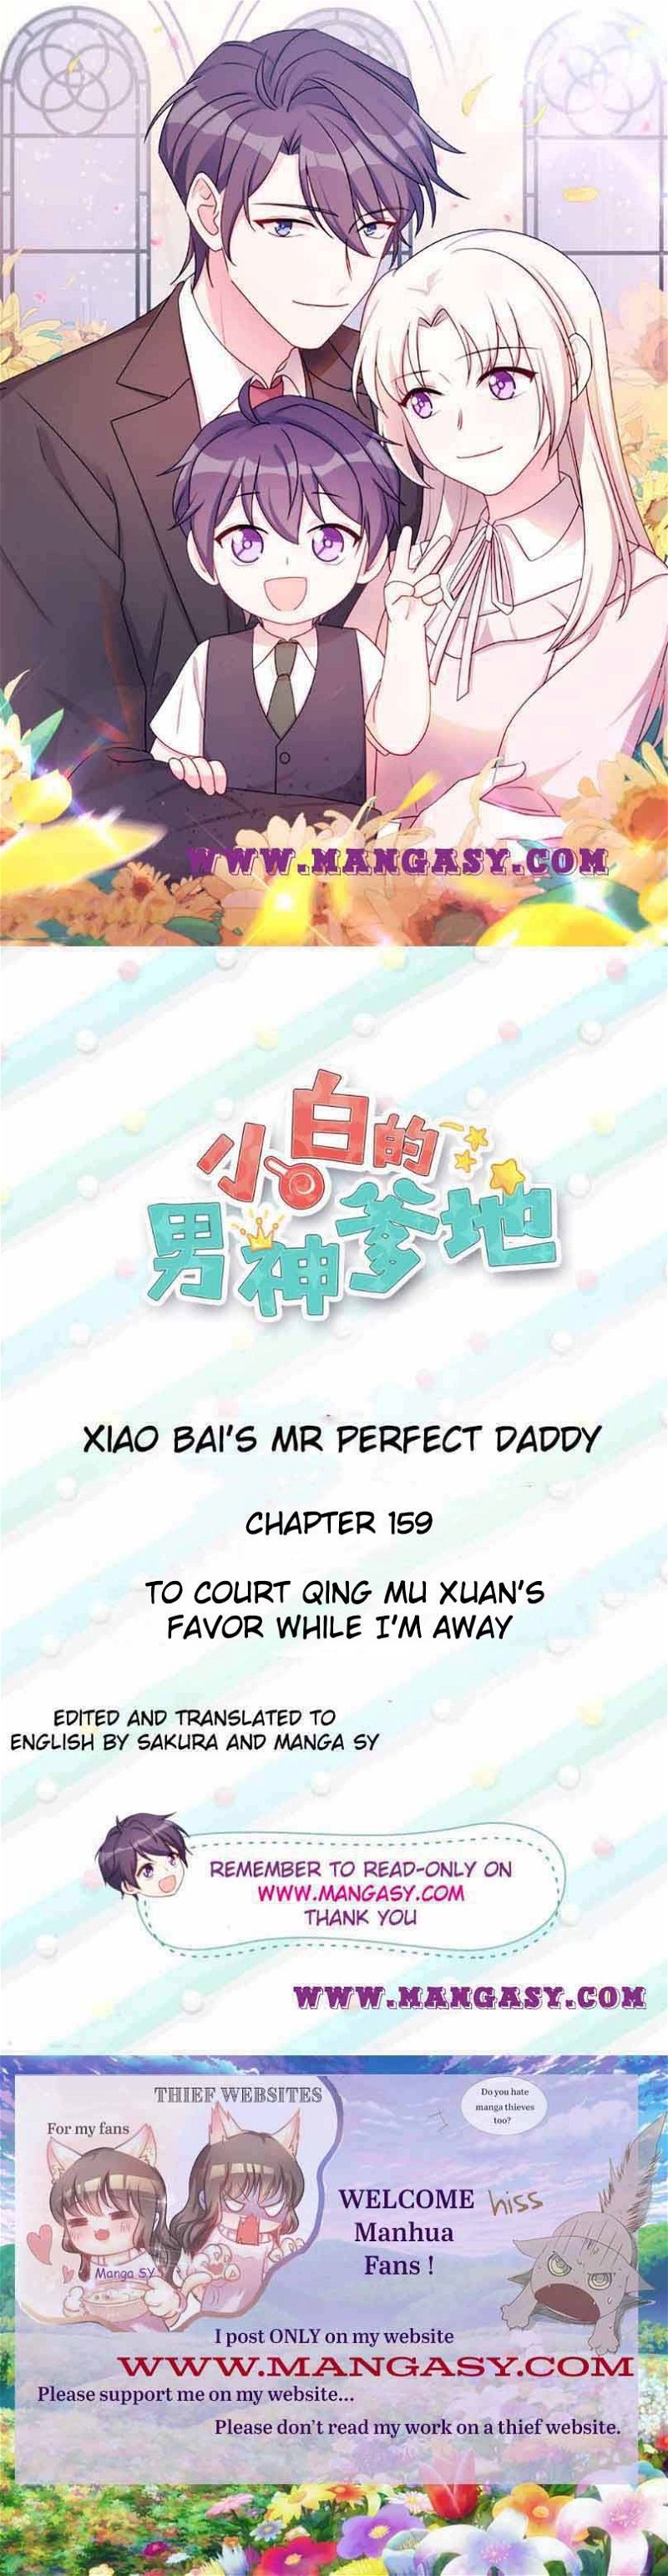 Xiao Bai’s father is a wonderful person Chapter 159 - Page 0